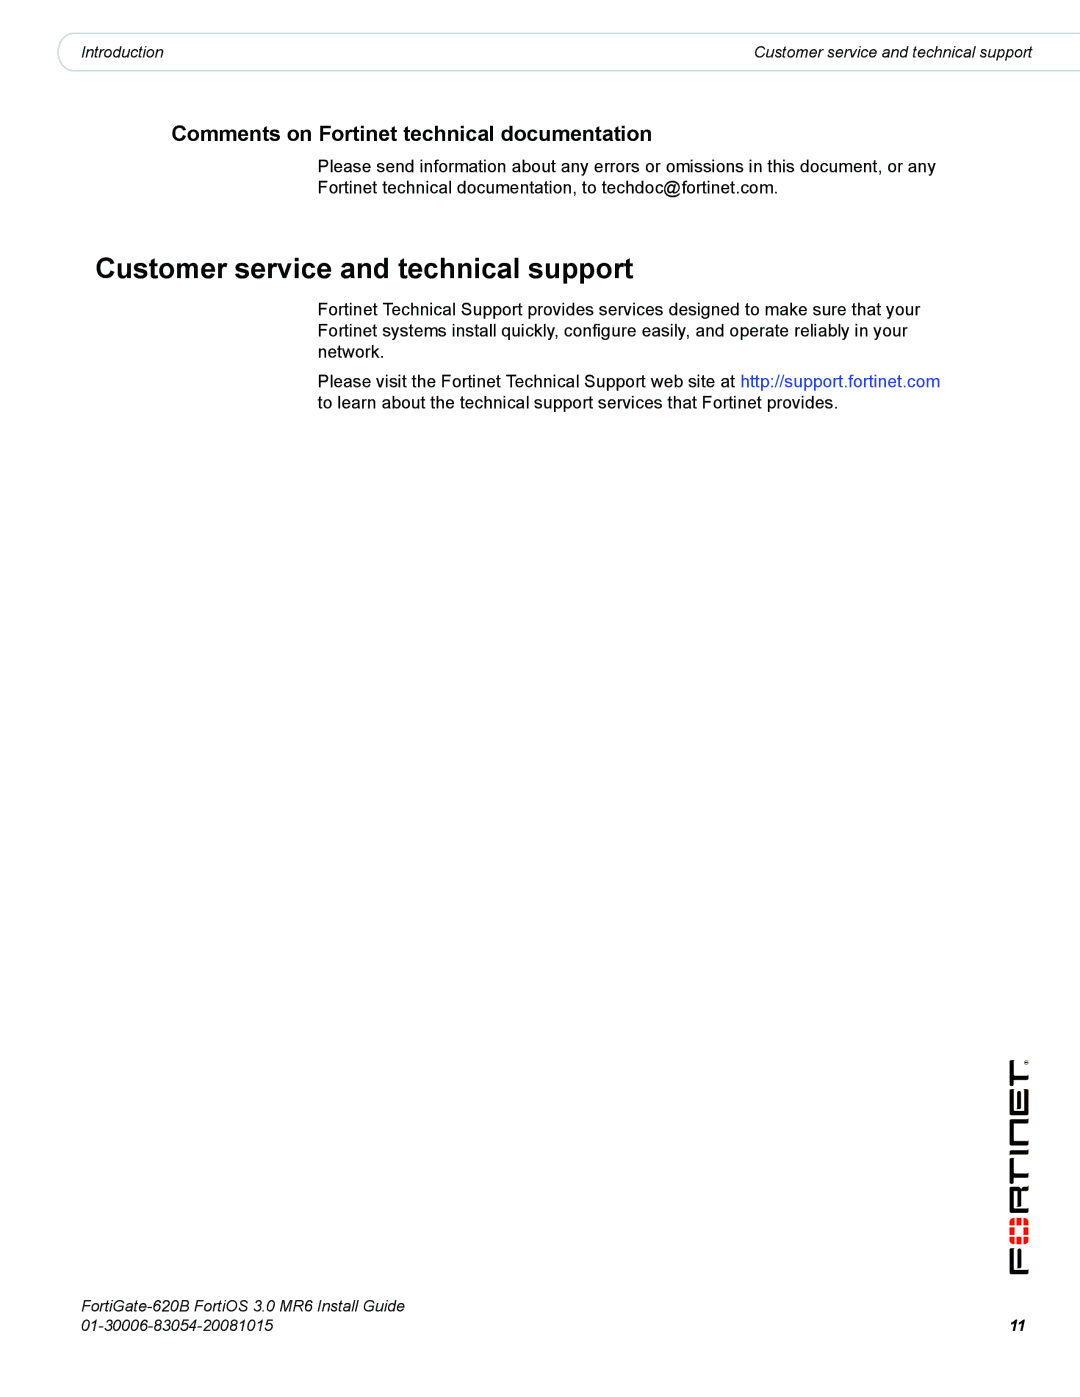 Fortinet 620B manual Customer service and technical support, Comments on Fortinet technical documentation 